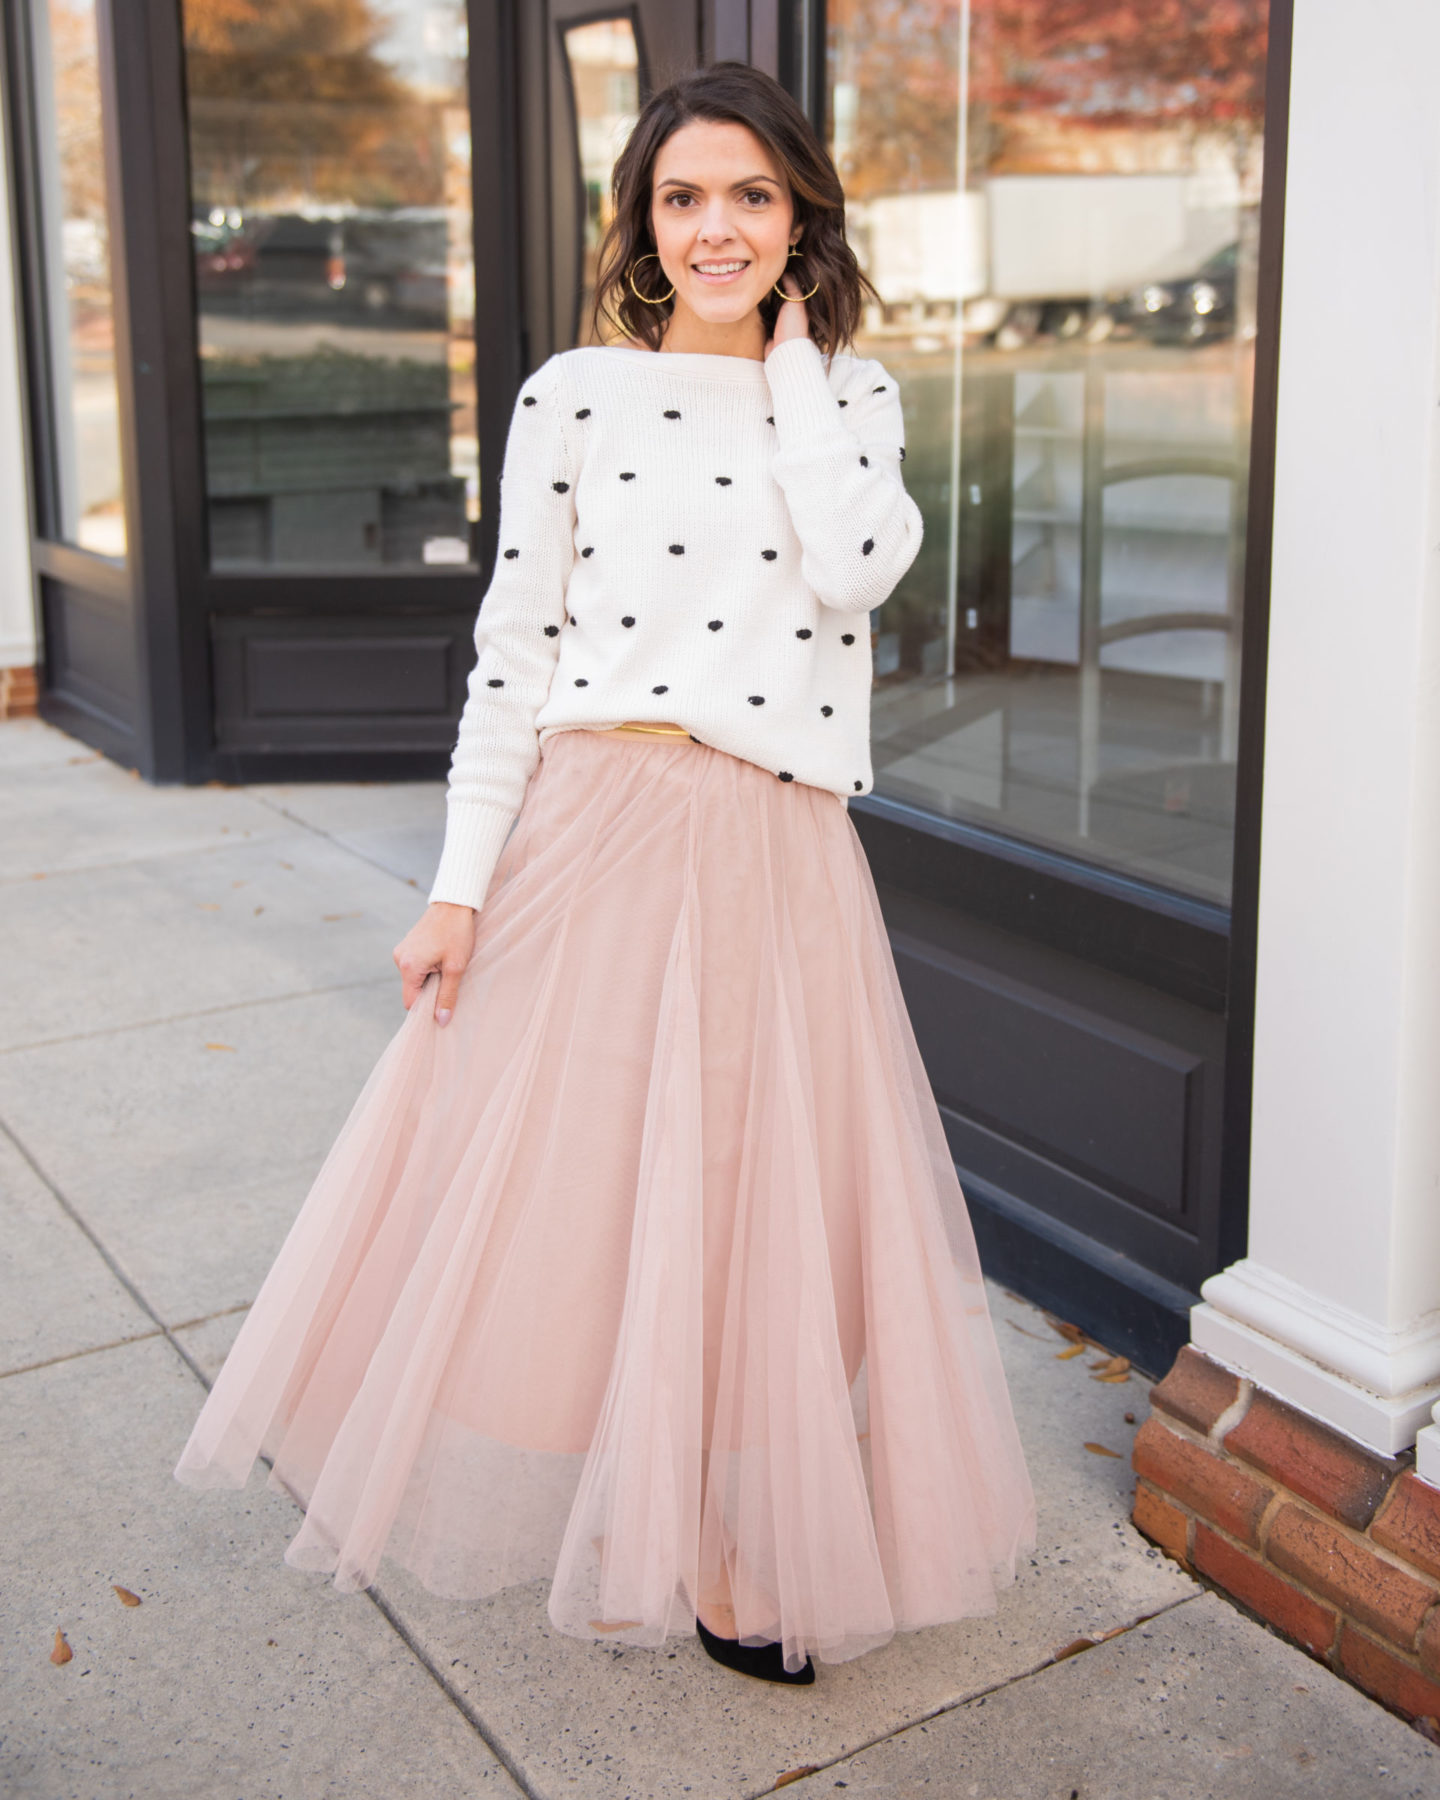 Ways To Style A Tulle Skirt The Sarah Stories | vlr.eng.br